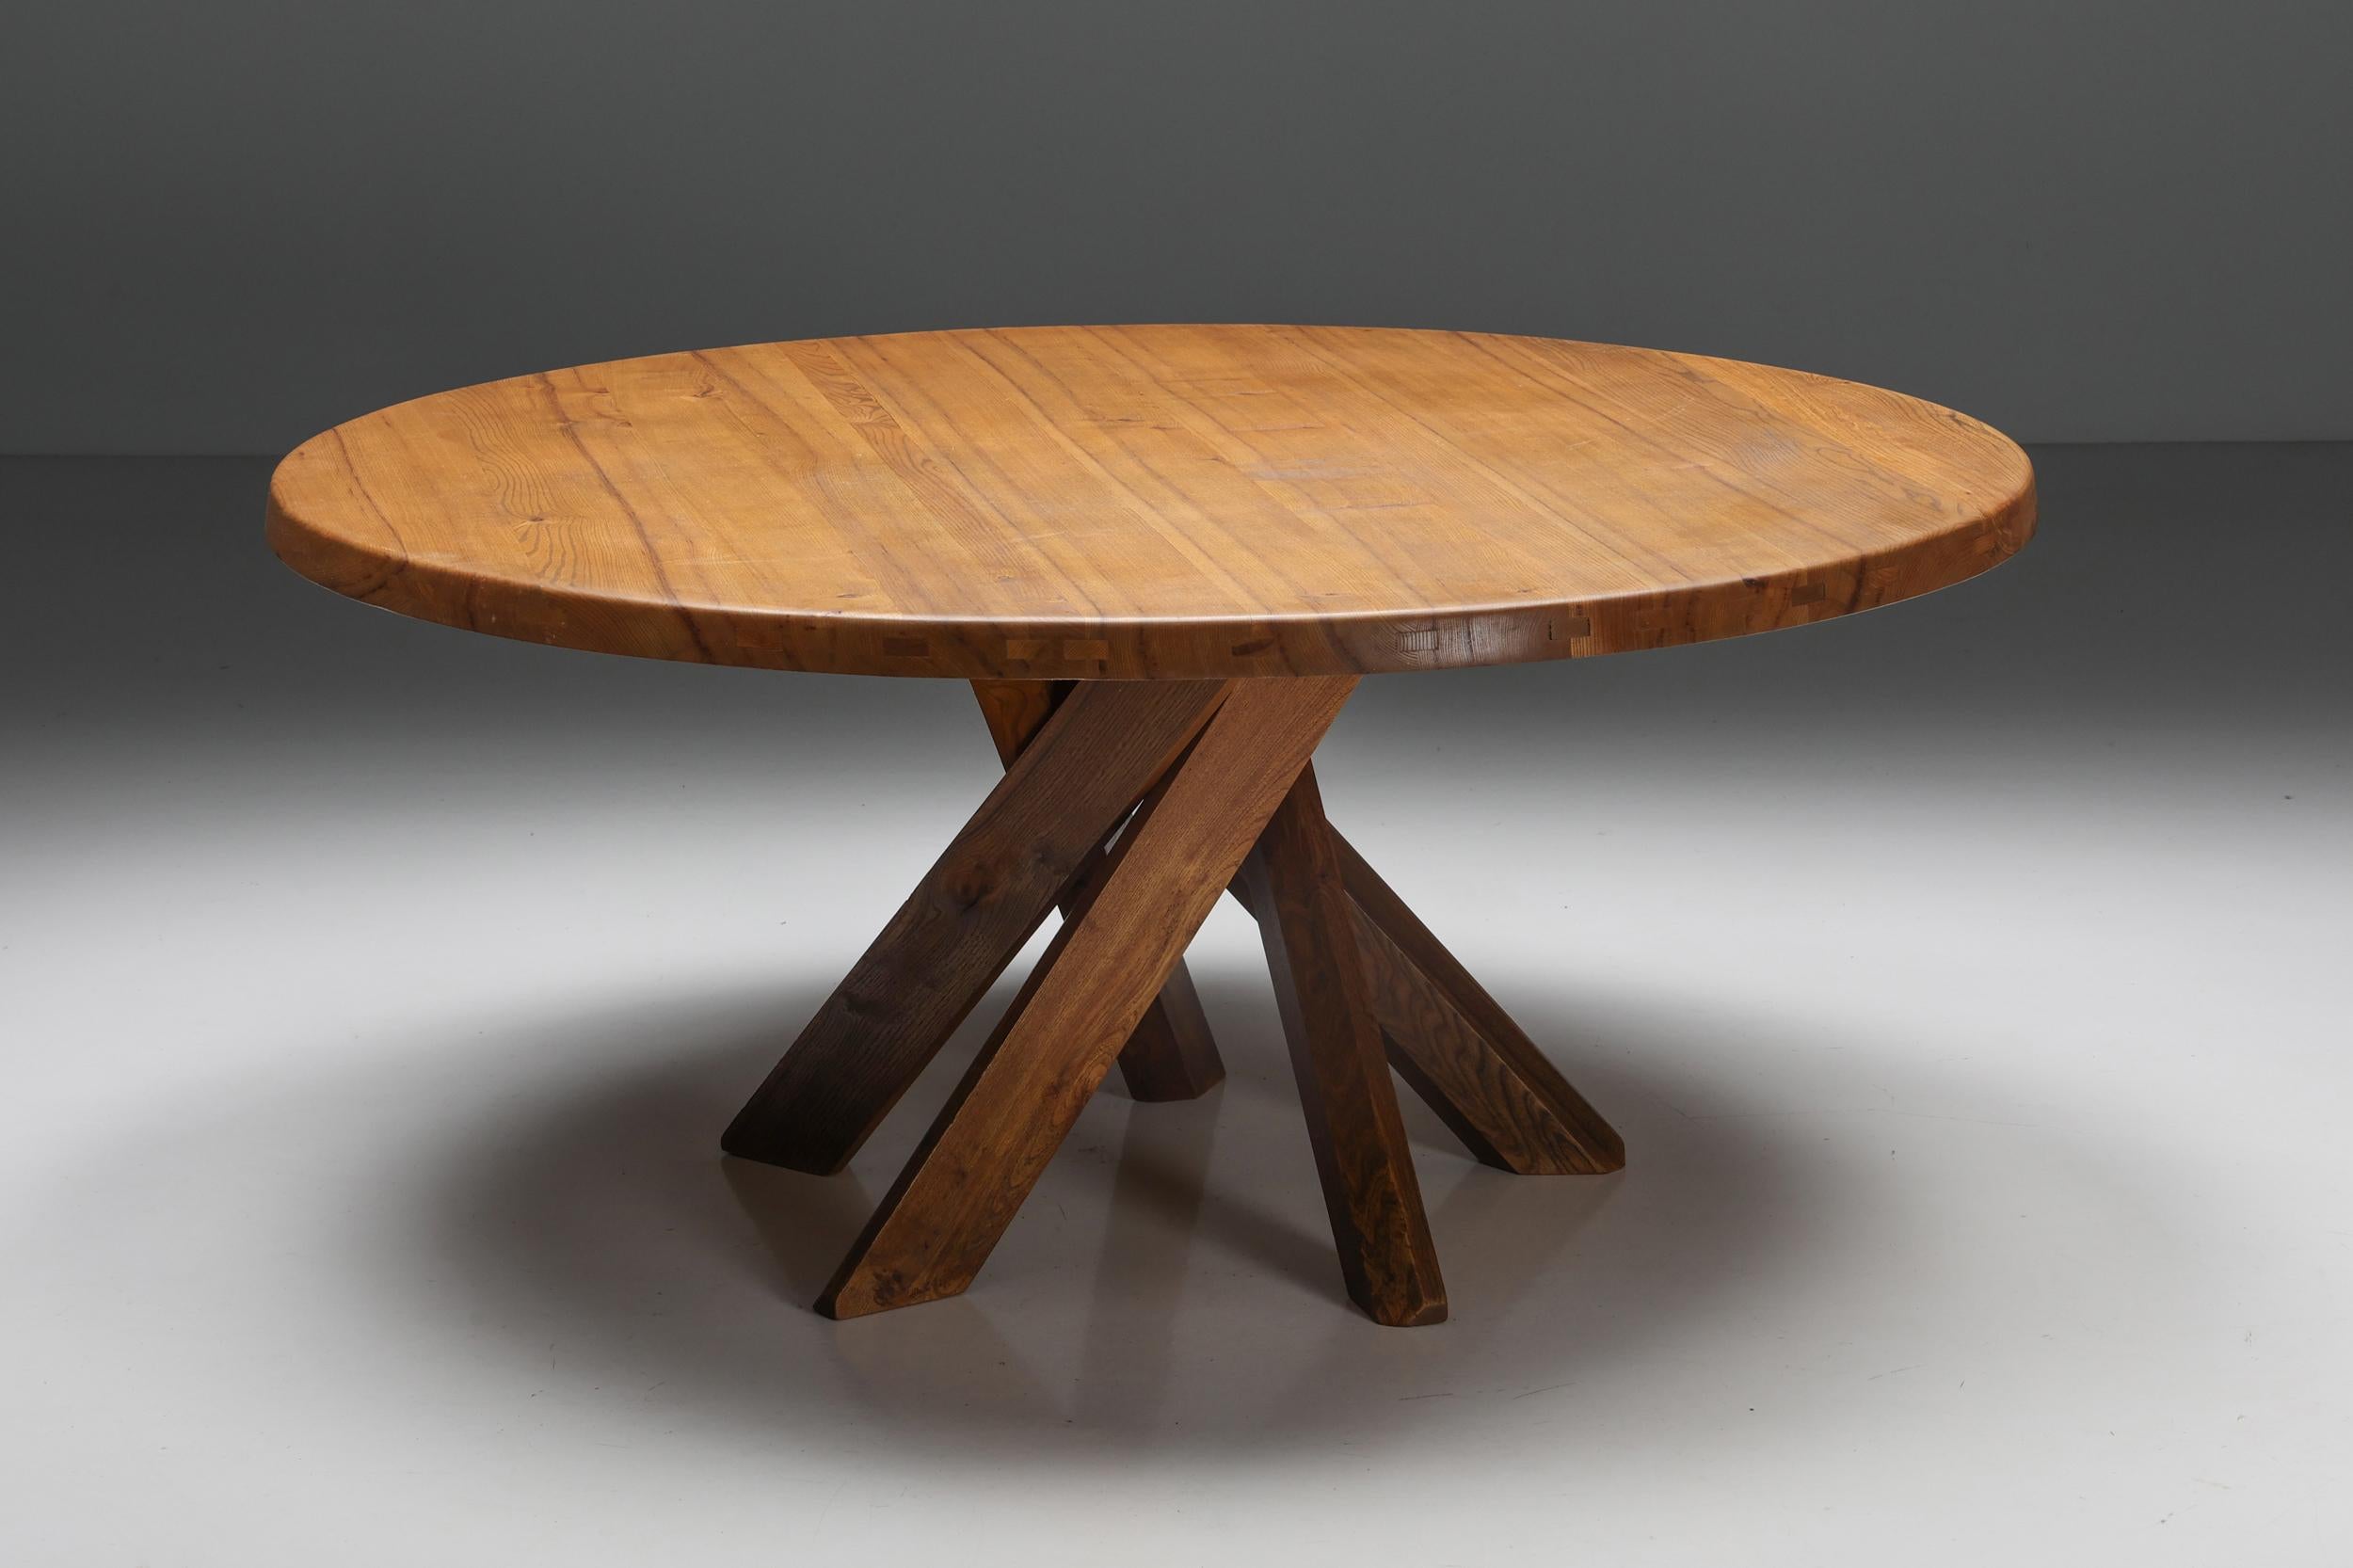 Pierre Chapo; Model T21; Round Dining Table; Solid Elm; Wood; Crossed Feet; France; 1973; Woodworking; Mid-Century Modern; French Craftsmanship;

A Pierre Chapo 'T21' round dining table in solid elm, composed of a thick top with a natural veining